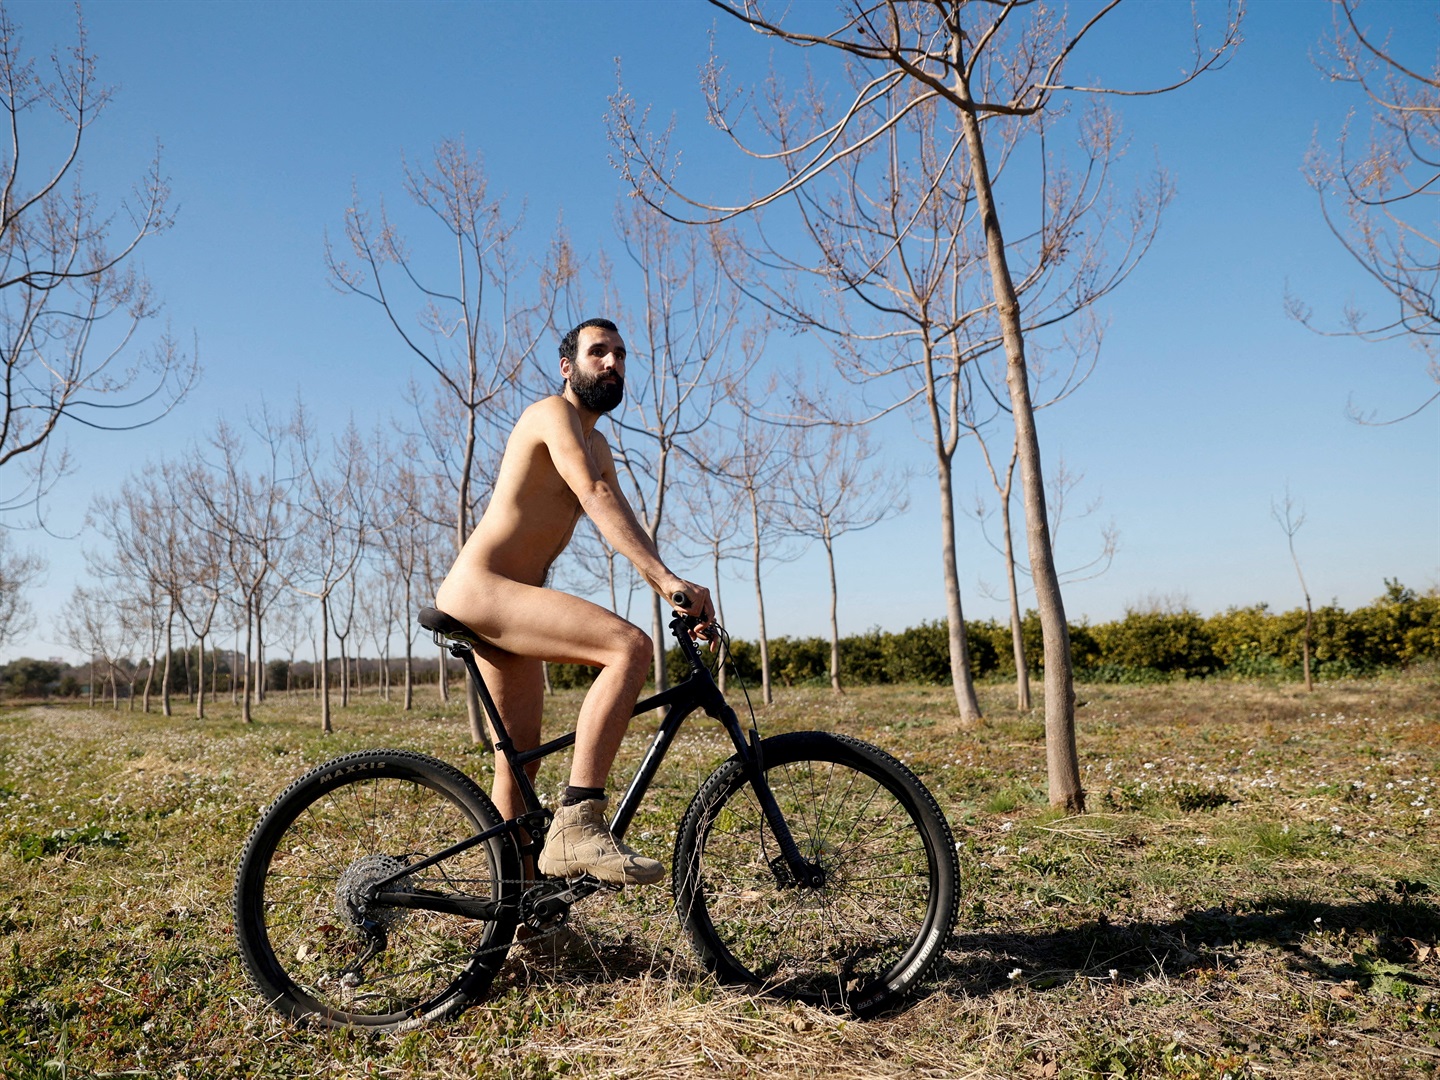 Businessinsider.co.za | A top Spanish court ruled that a man has the right to walk around naked in public, report says